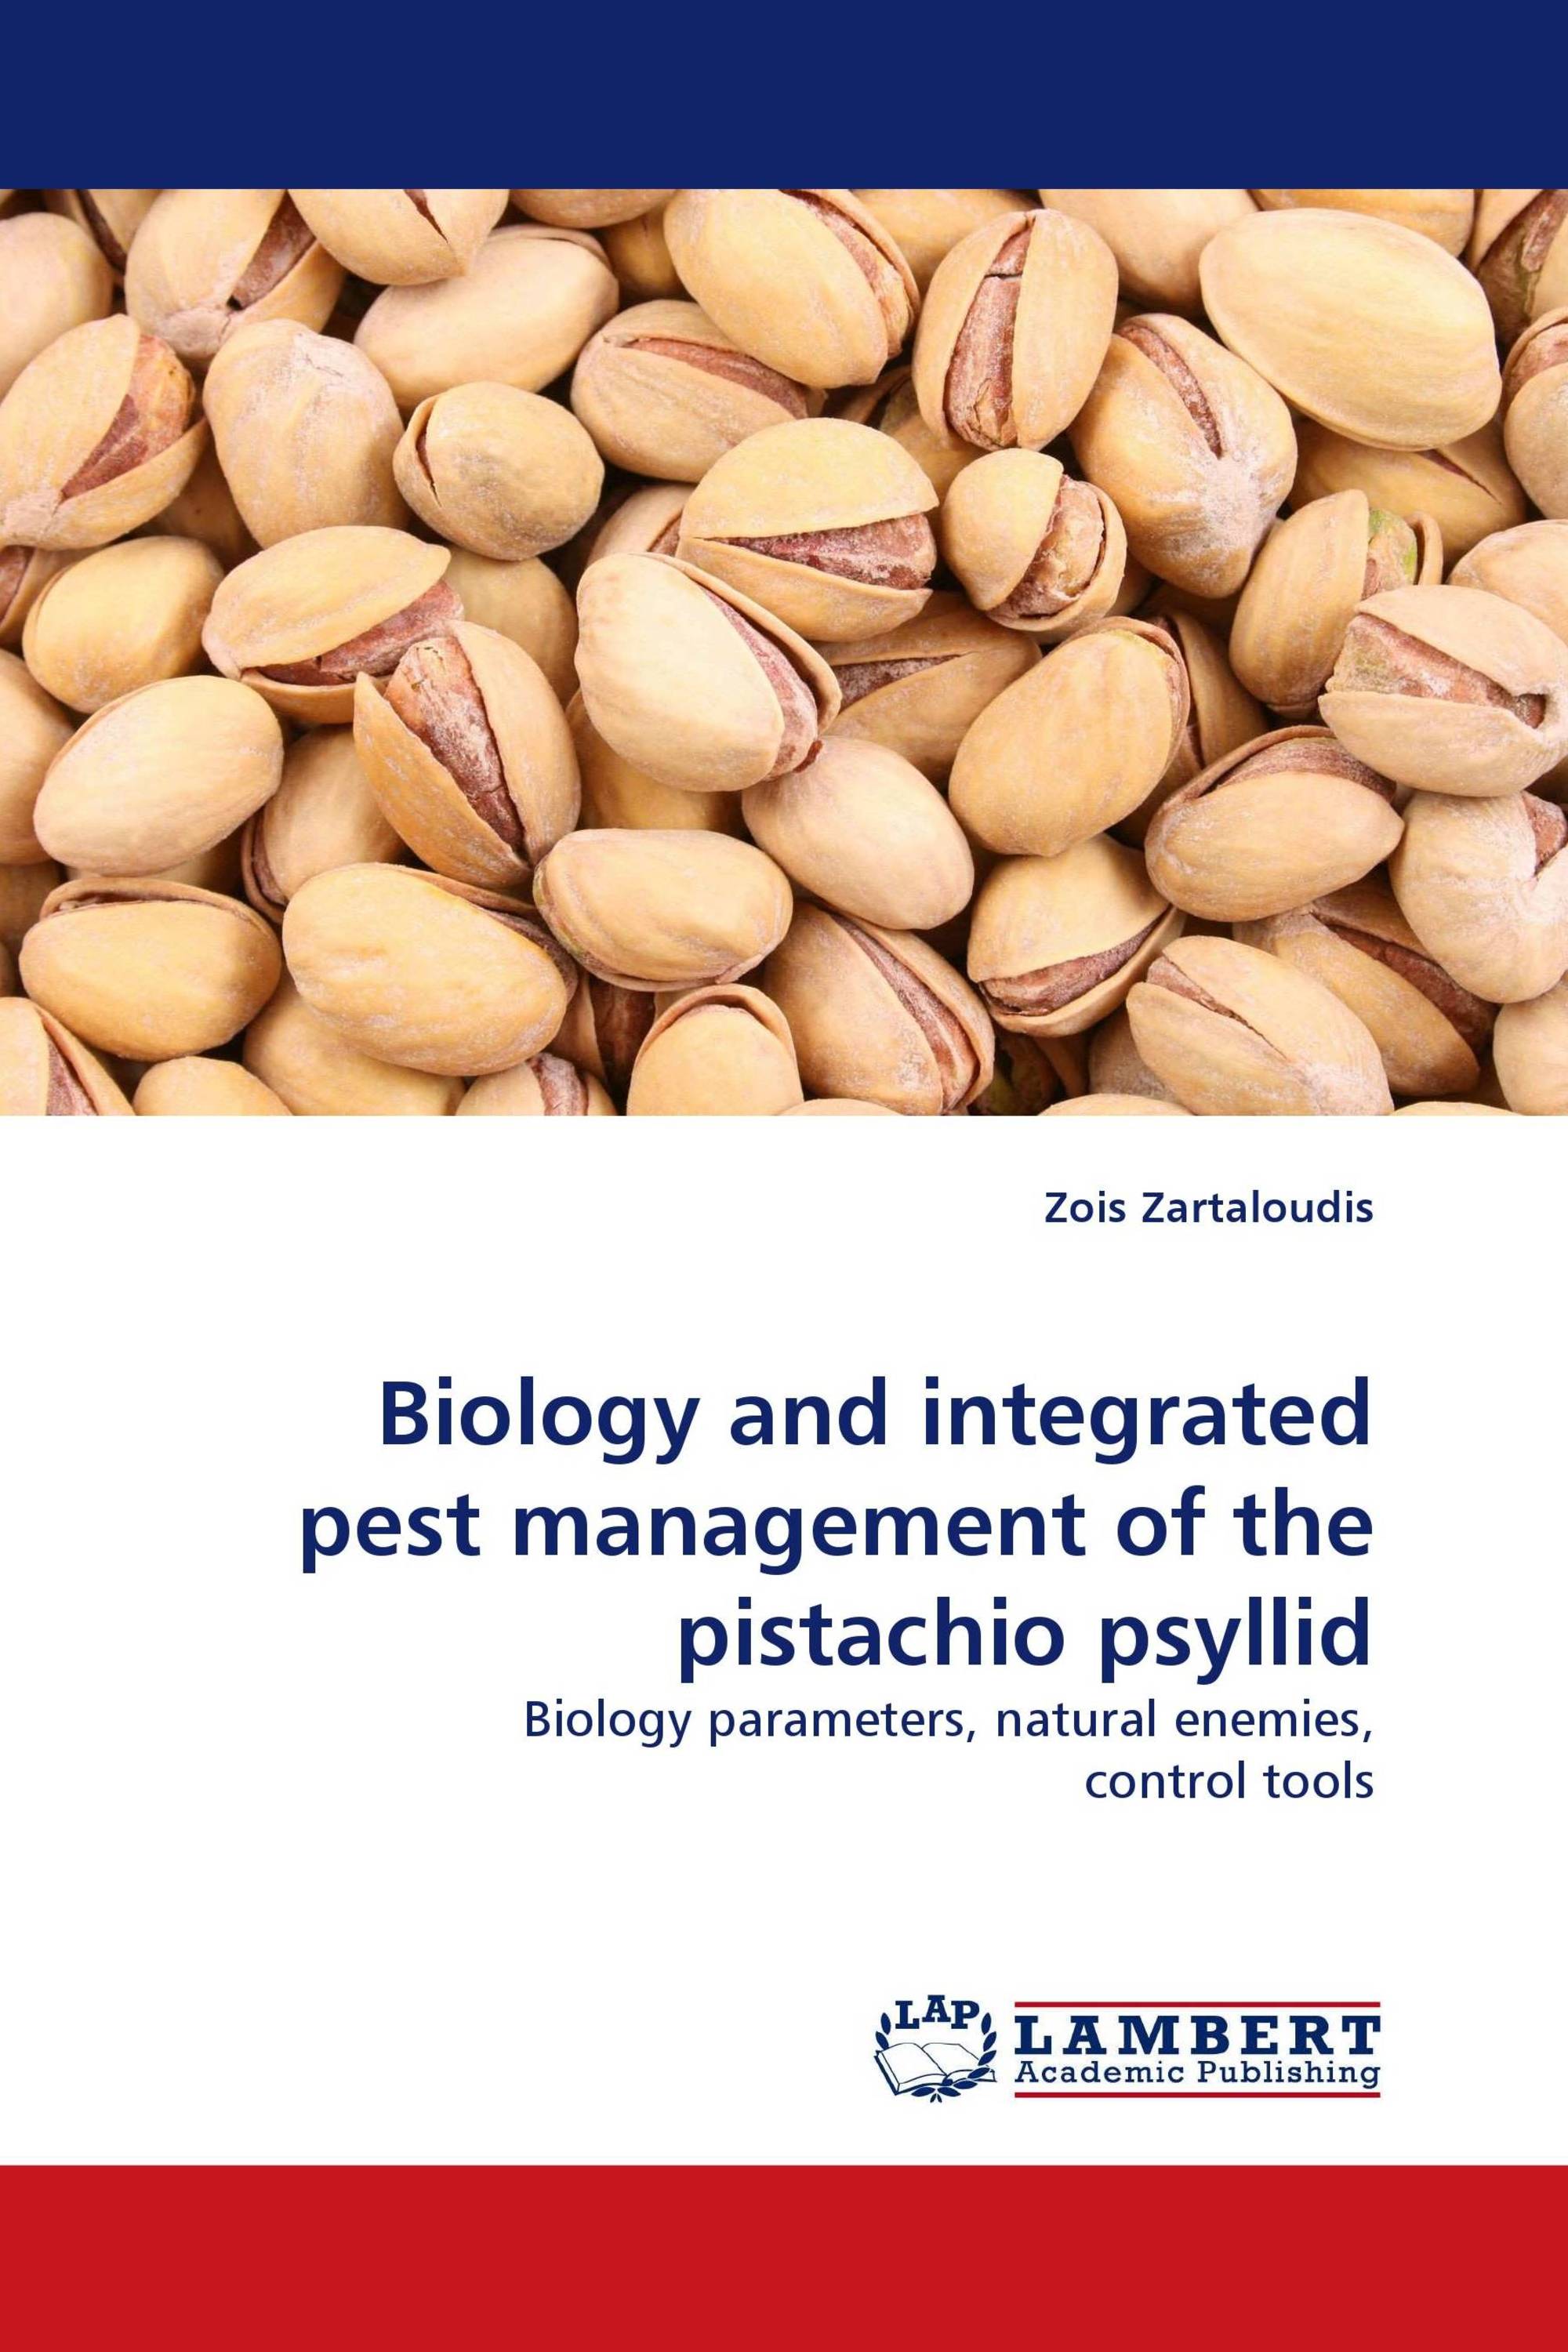 Biology and integrated pest management of the pistachio psyllid